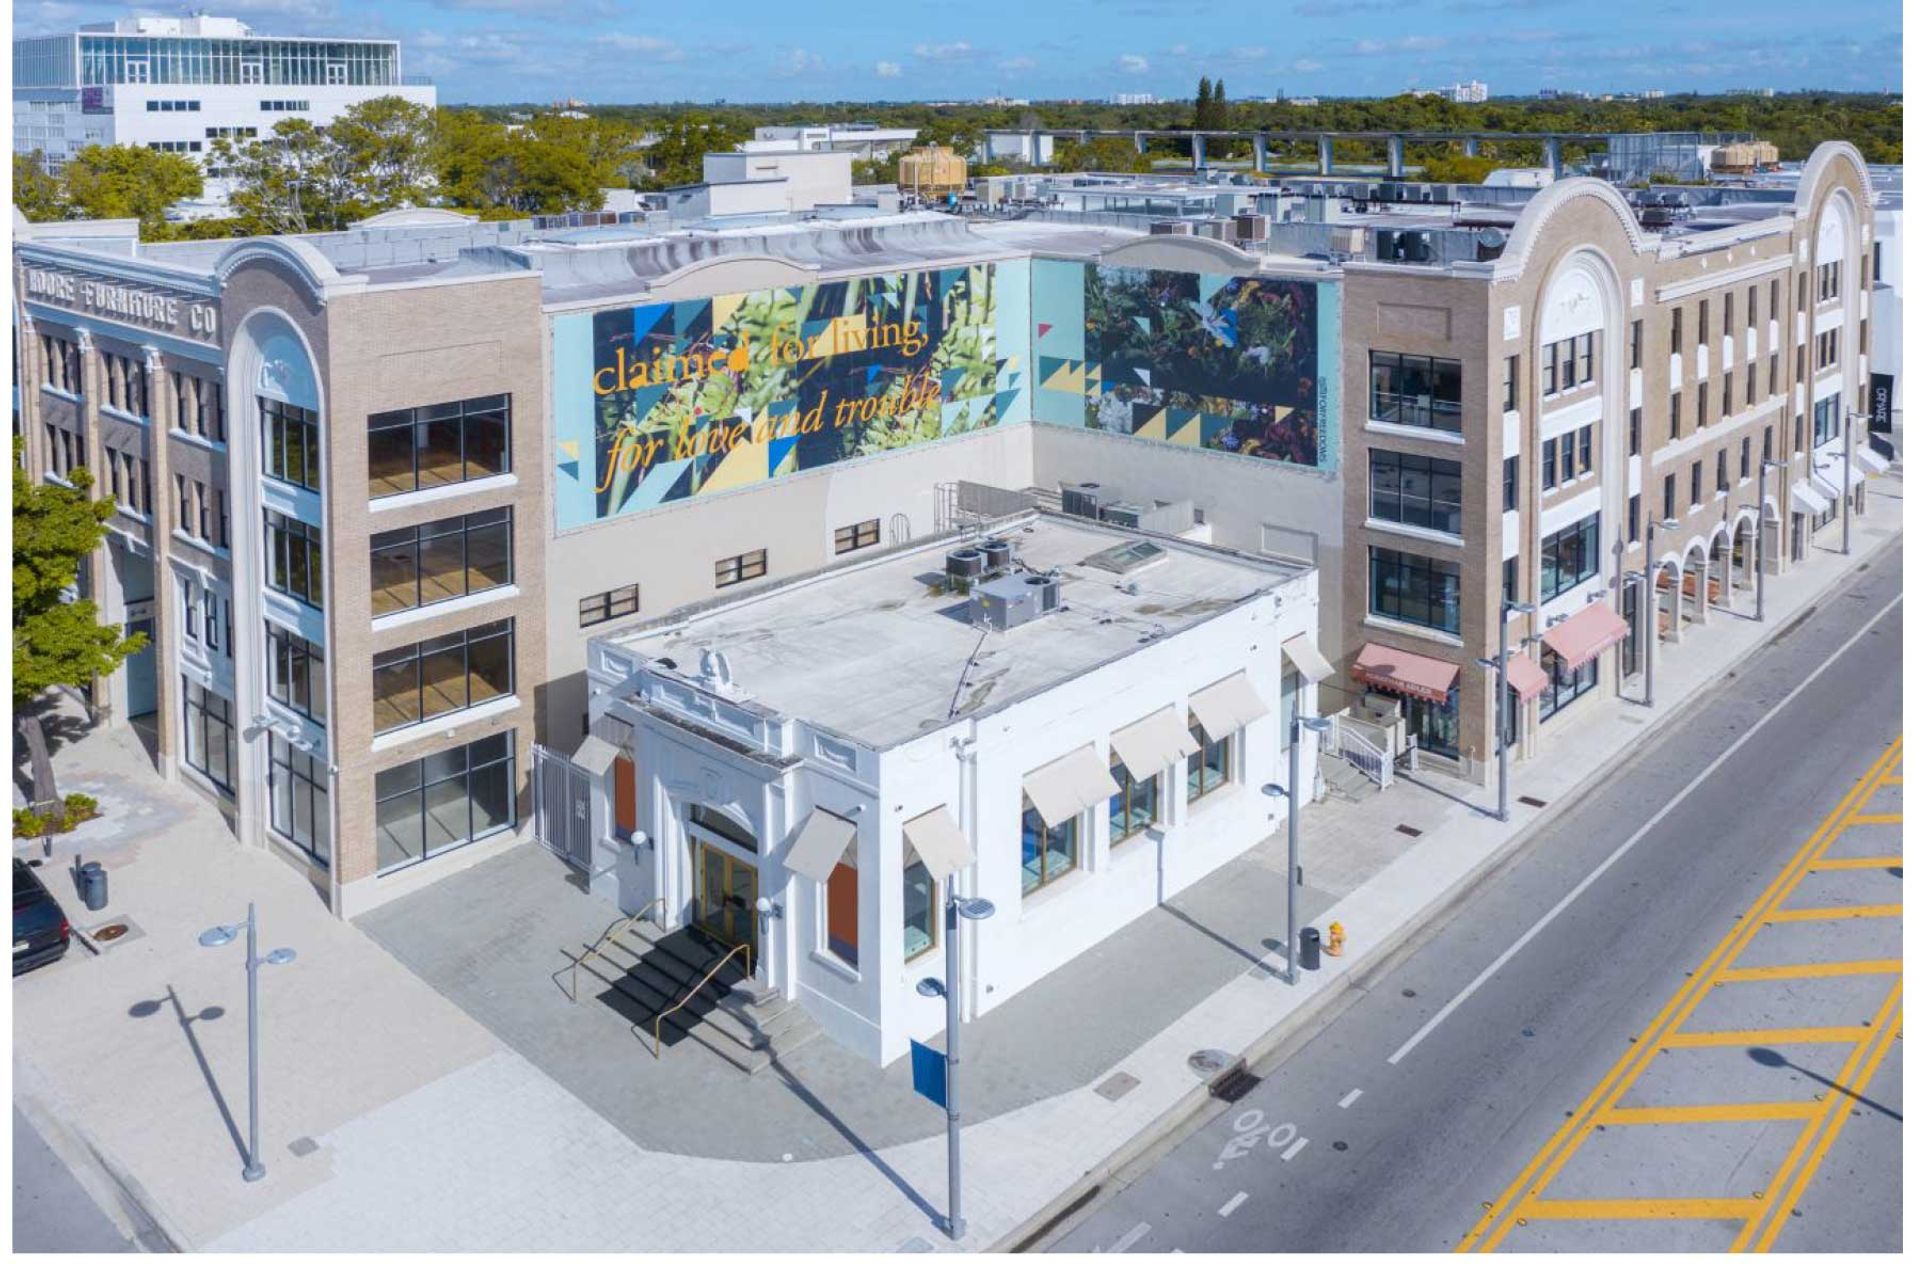 Aerial view of The Moore Building, in Miami Design District featuring billboard artwork by Adler Guerrier, in  partnership with For Freedoms 